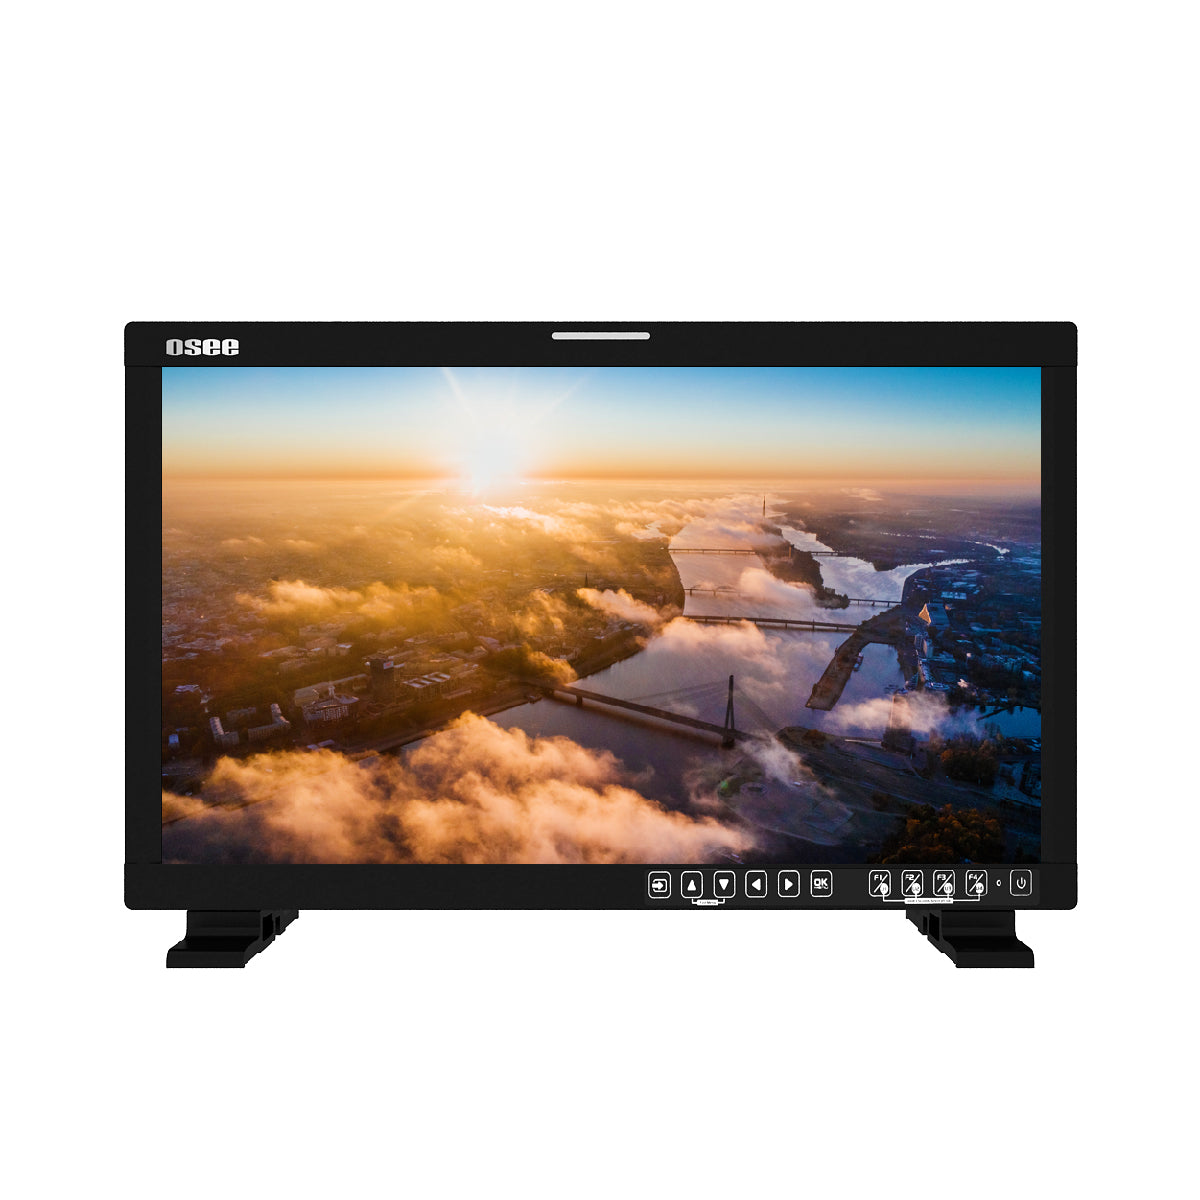 LCM215-HDR+  21.5inch 1500nits HDR Field Production Monitor Kit